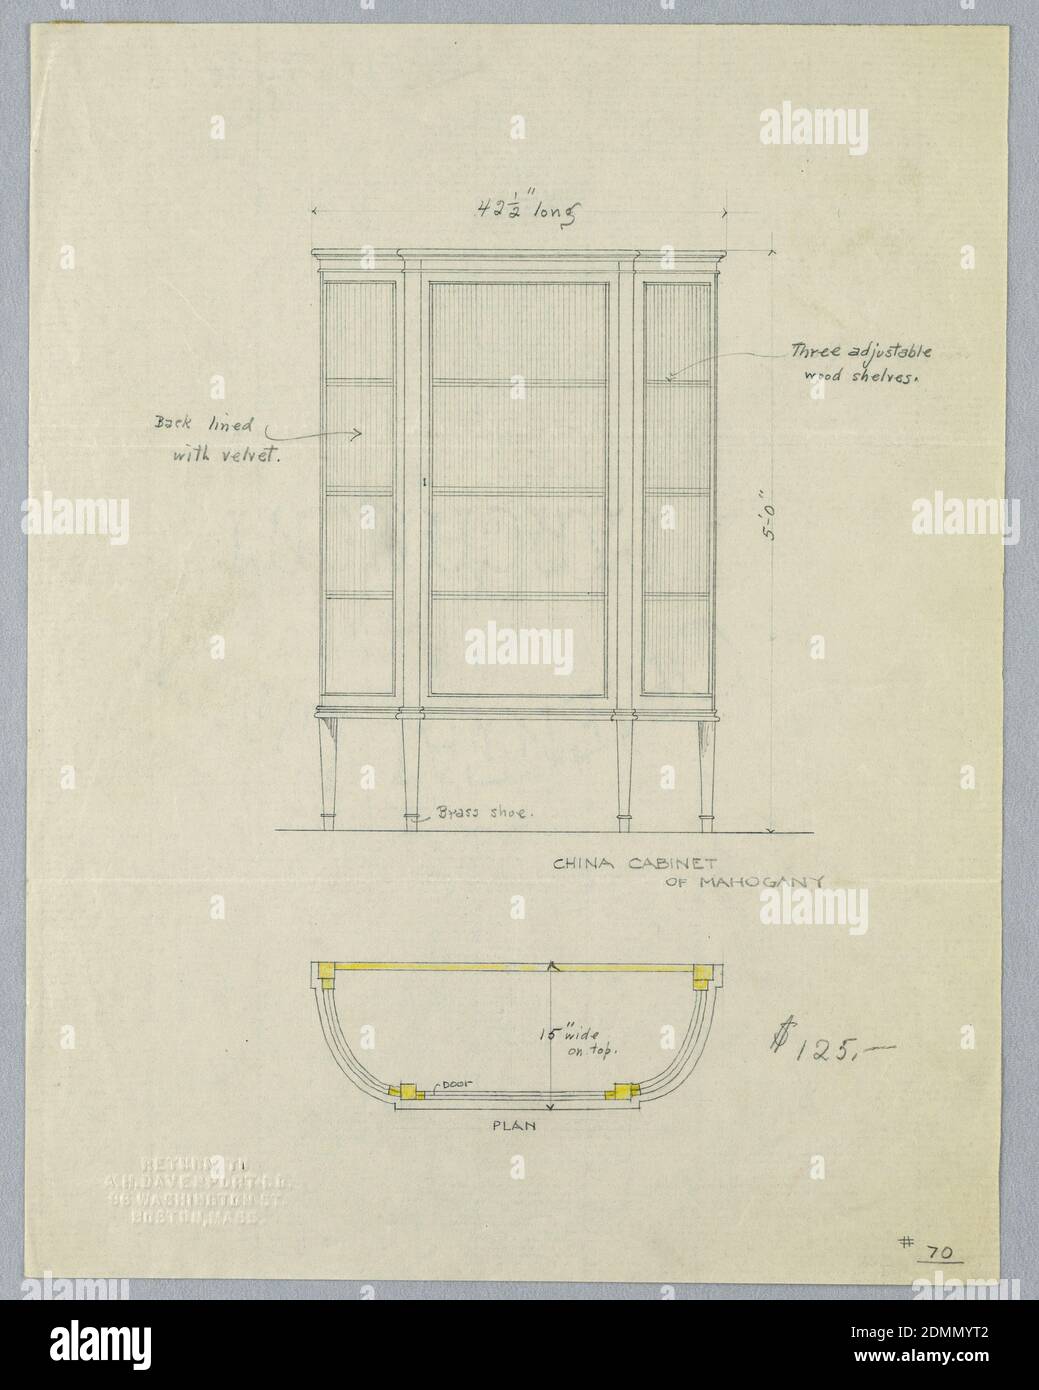 Design for China Cabinet of Mahogany in Elevation and Plan, A.N. Davenport Co., Graphite and yellow color pencil on thin cream paper, Elevation: rectangular tri-partite front with glass door and 3 shelves raised on 4 straight tapering legs. Plan: semi-circular cabinet top with flattened central front with details indicated in yellow color pencil., 1900–05, furniture, Drawing Stock Photo